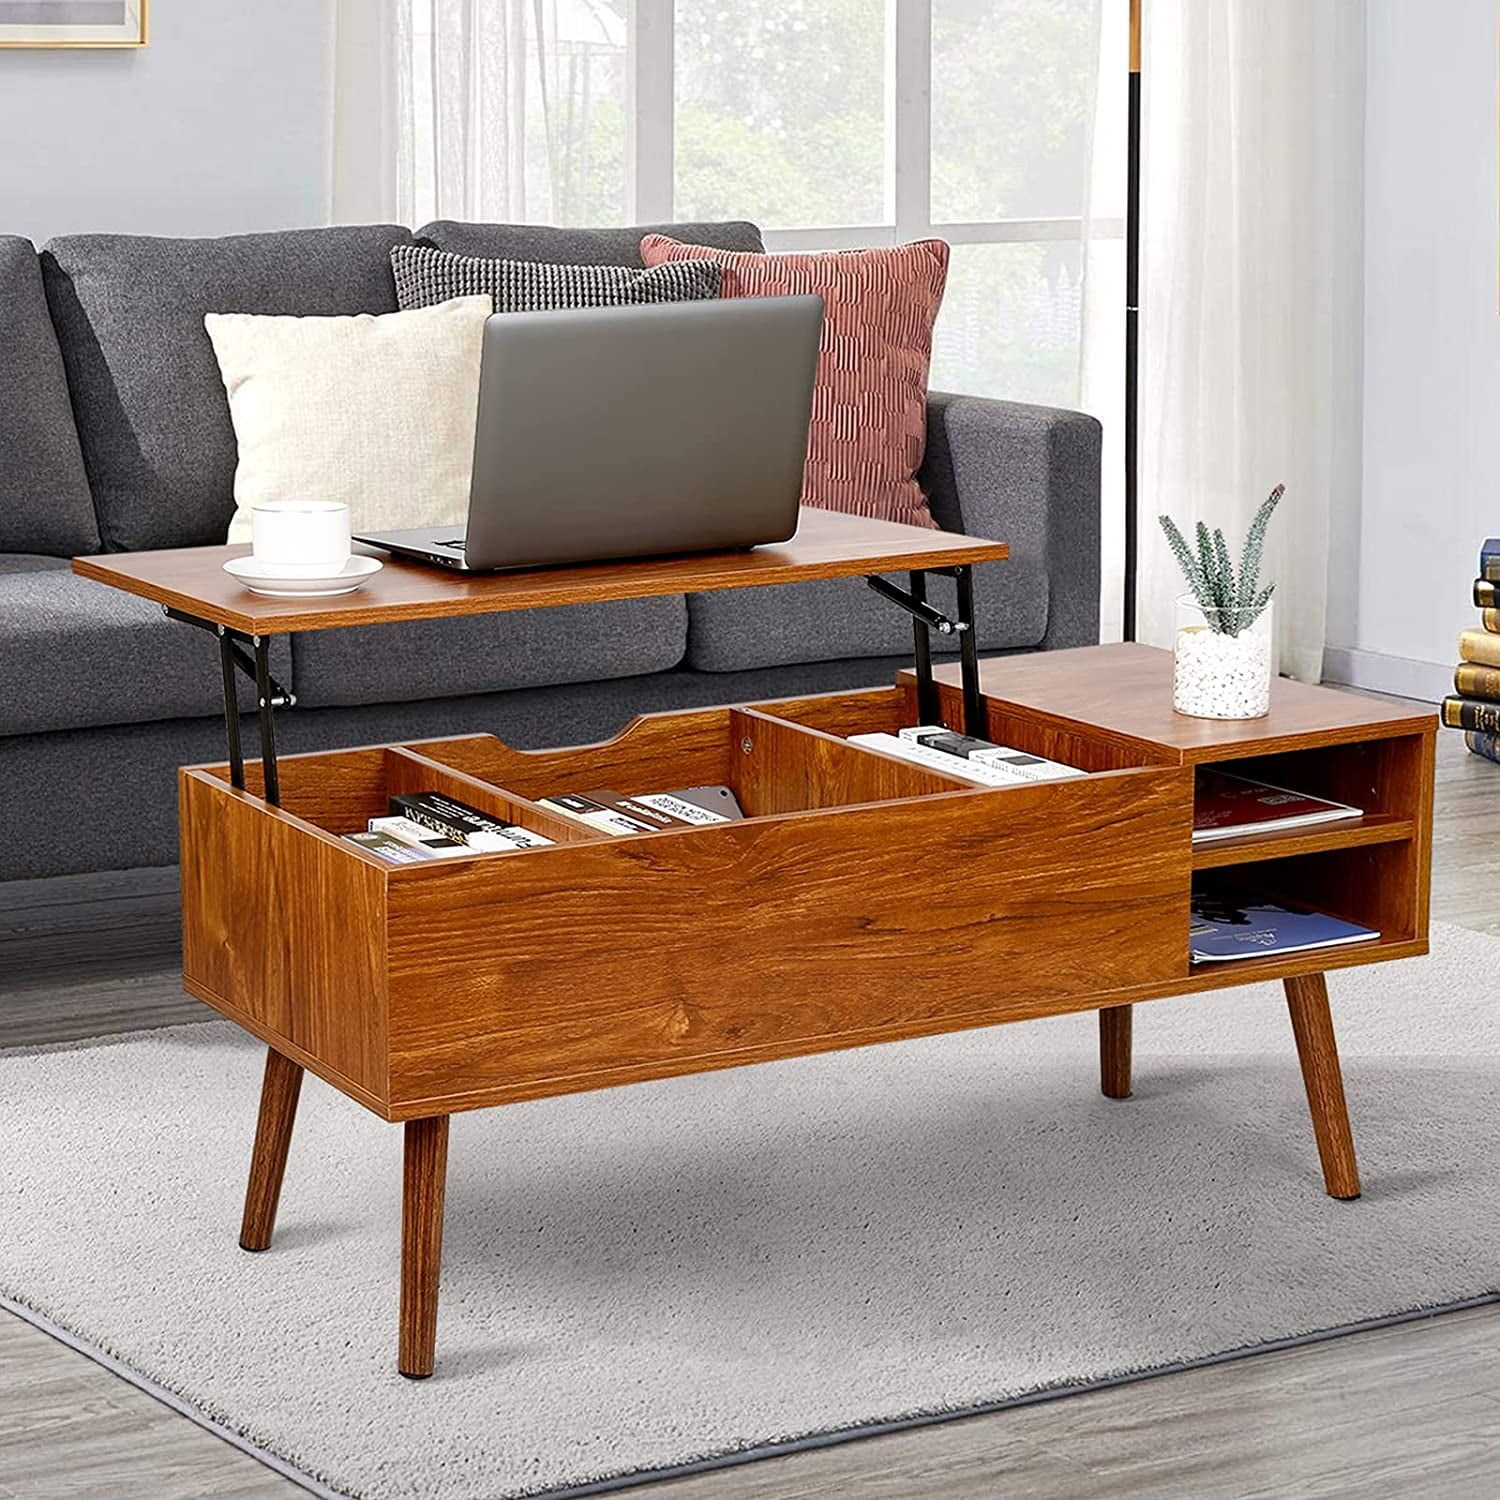 Modern Lift Top Coffee Table With Hidden Compartment Storage,adjustable Regarding Modern Wooden Lift Top Tables (Gallery 3 of 20)